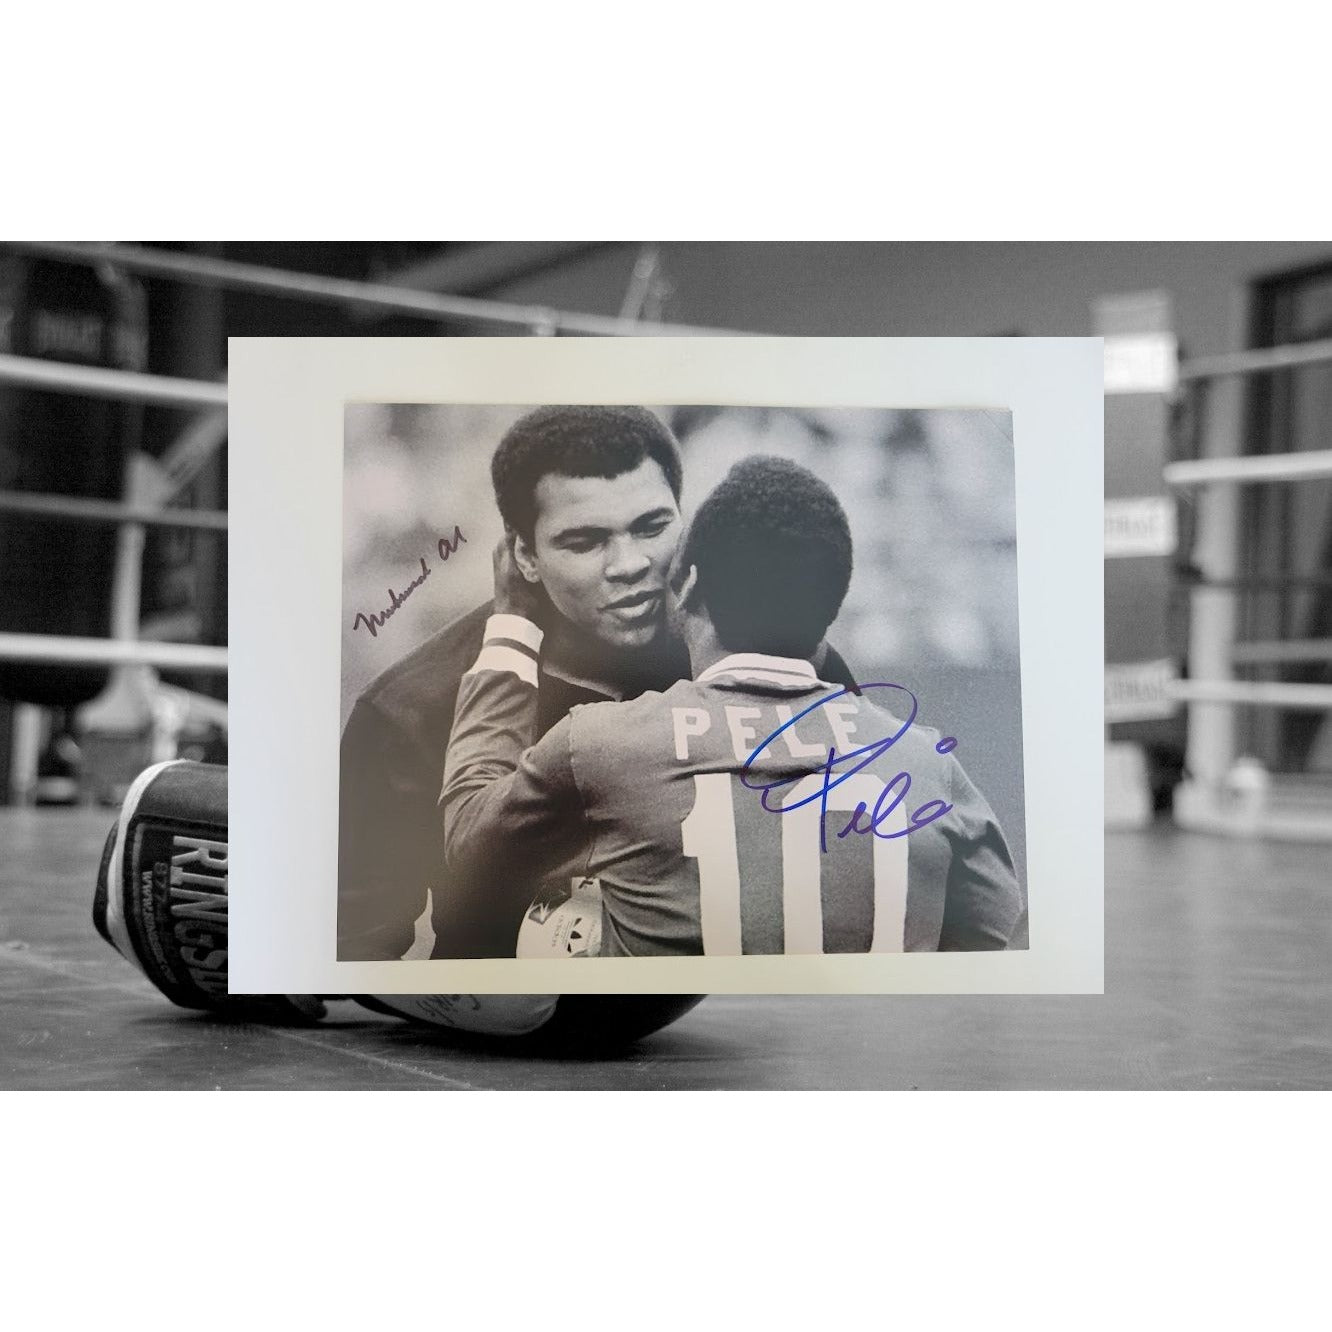 Muhammad Ali and Pele 8 x 10 photo signed with proof